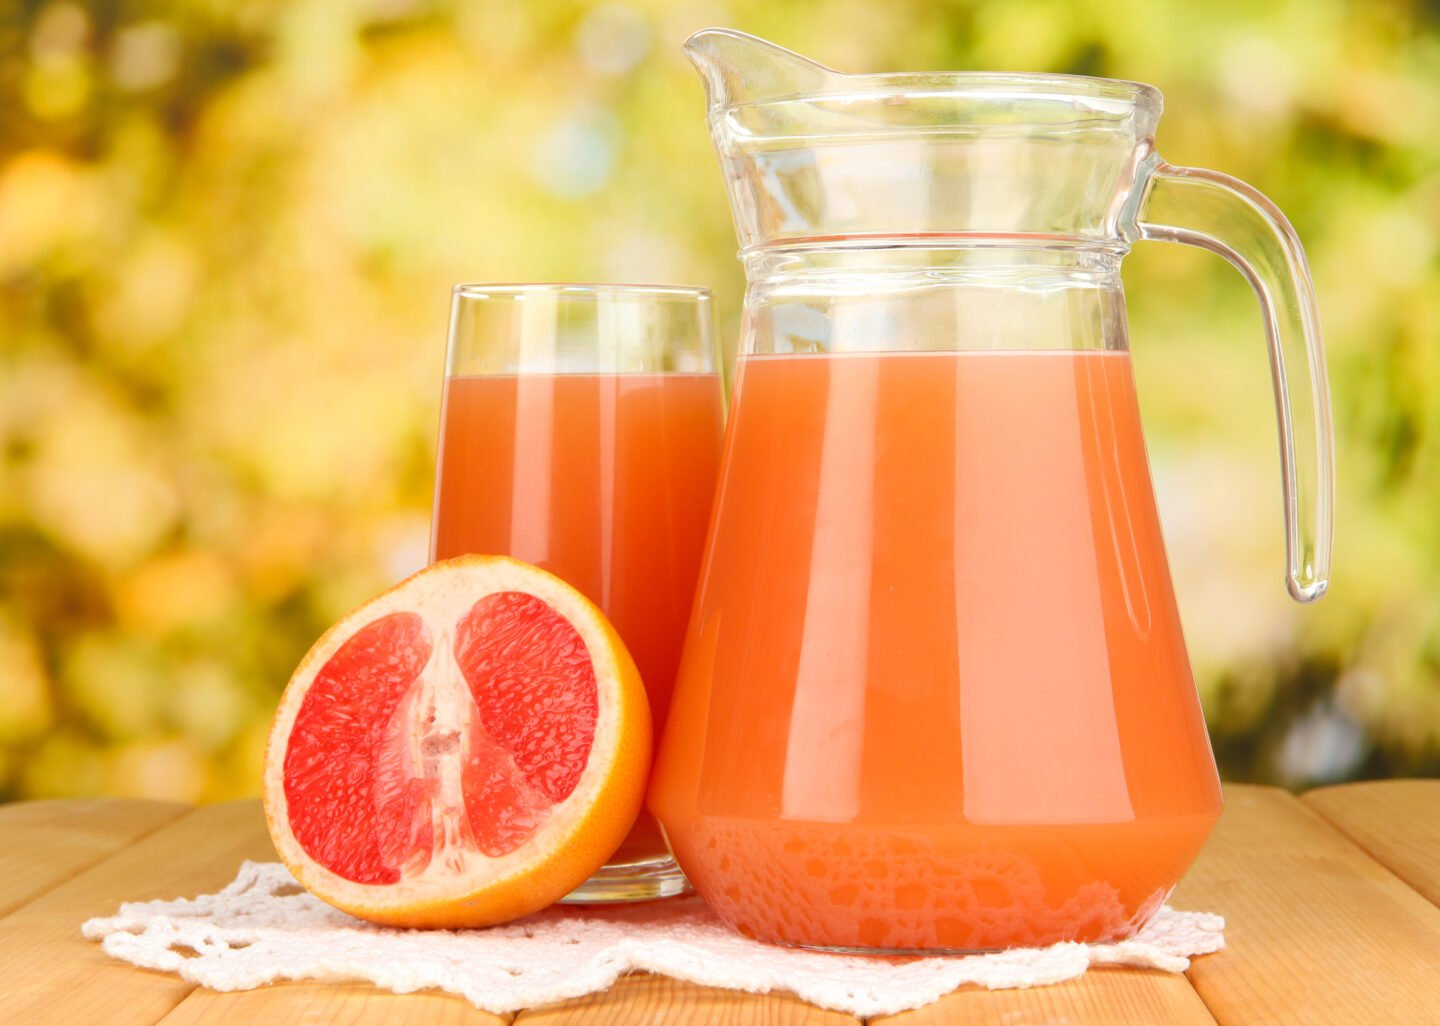 Full,Glass,And,Jug,Of,Grapefruit,Juice,And,Grapefruits,On